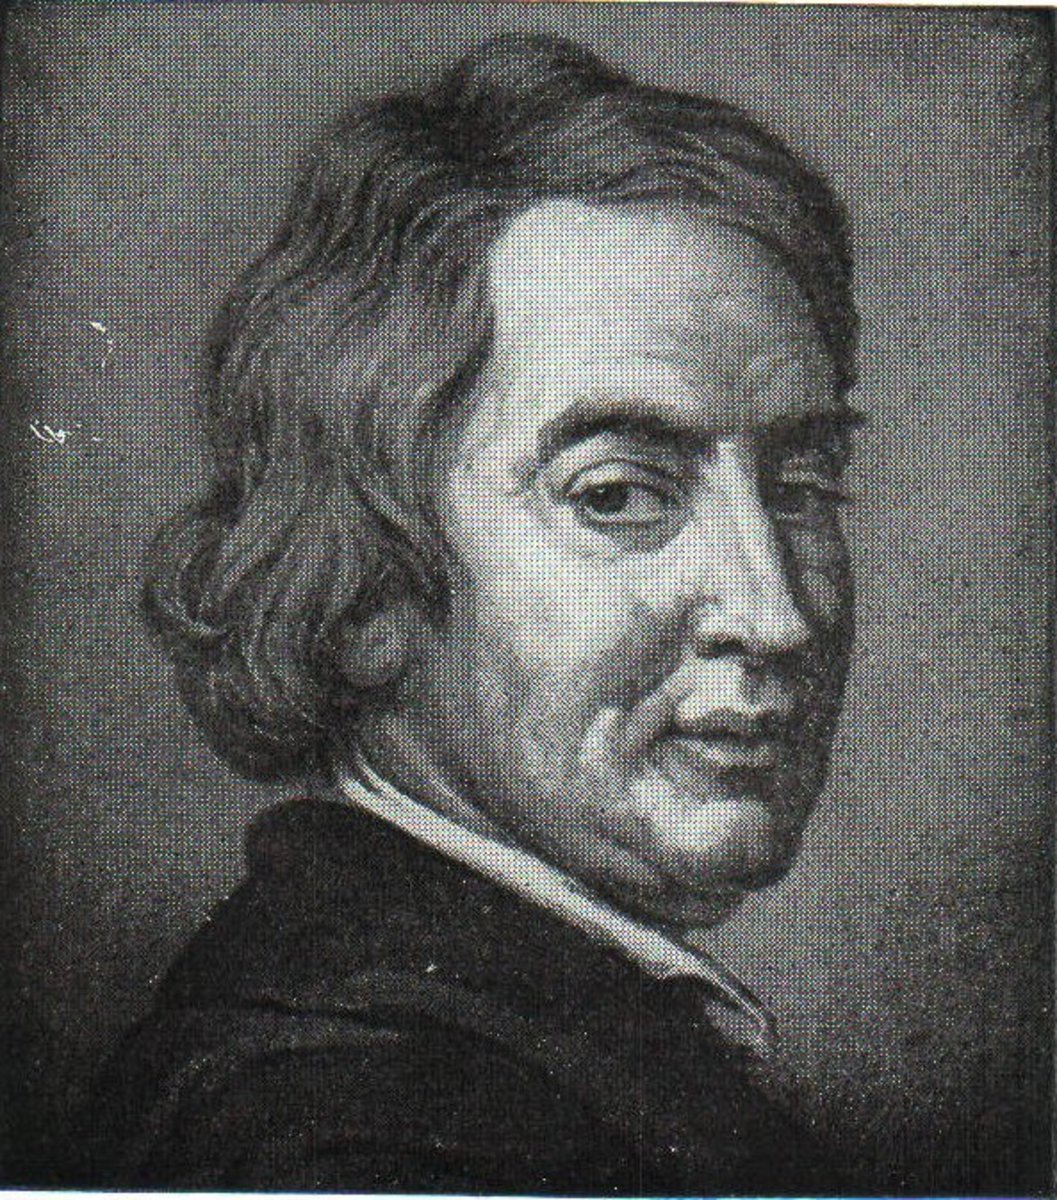 John Dryden coined the rule that prepositions should not be used at the end of a sentence.